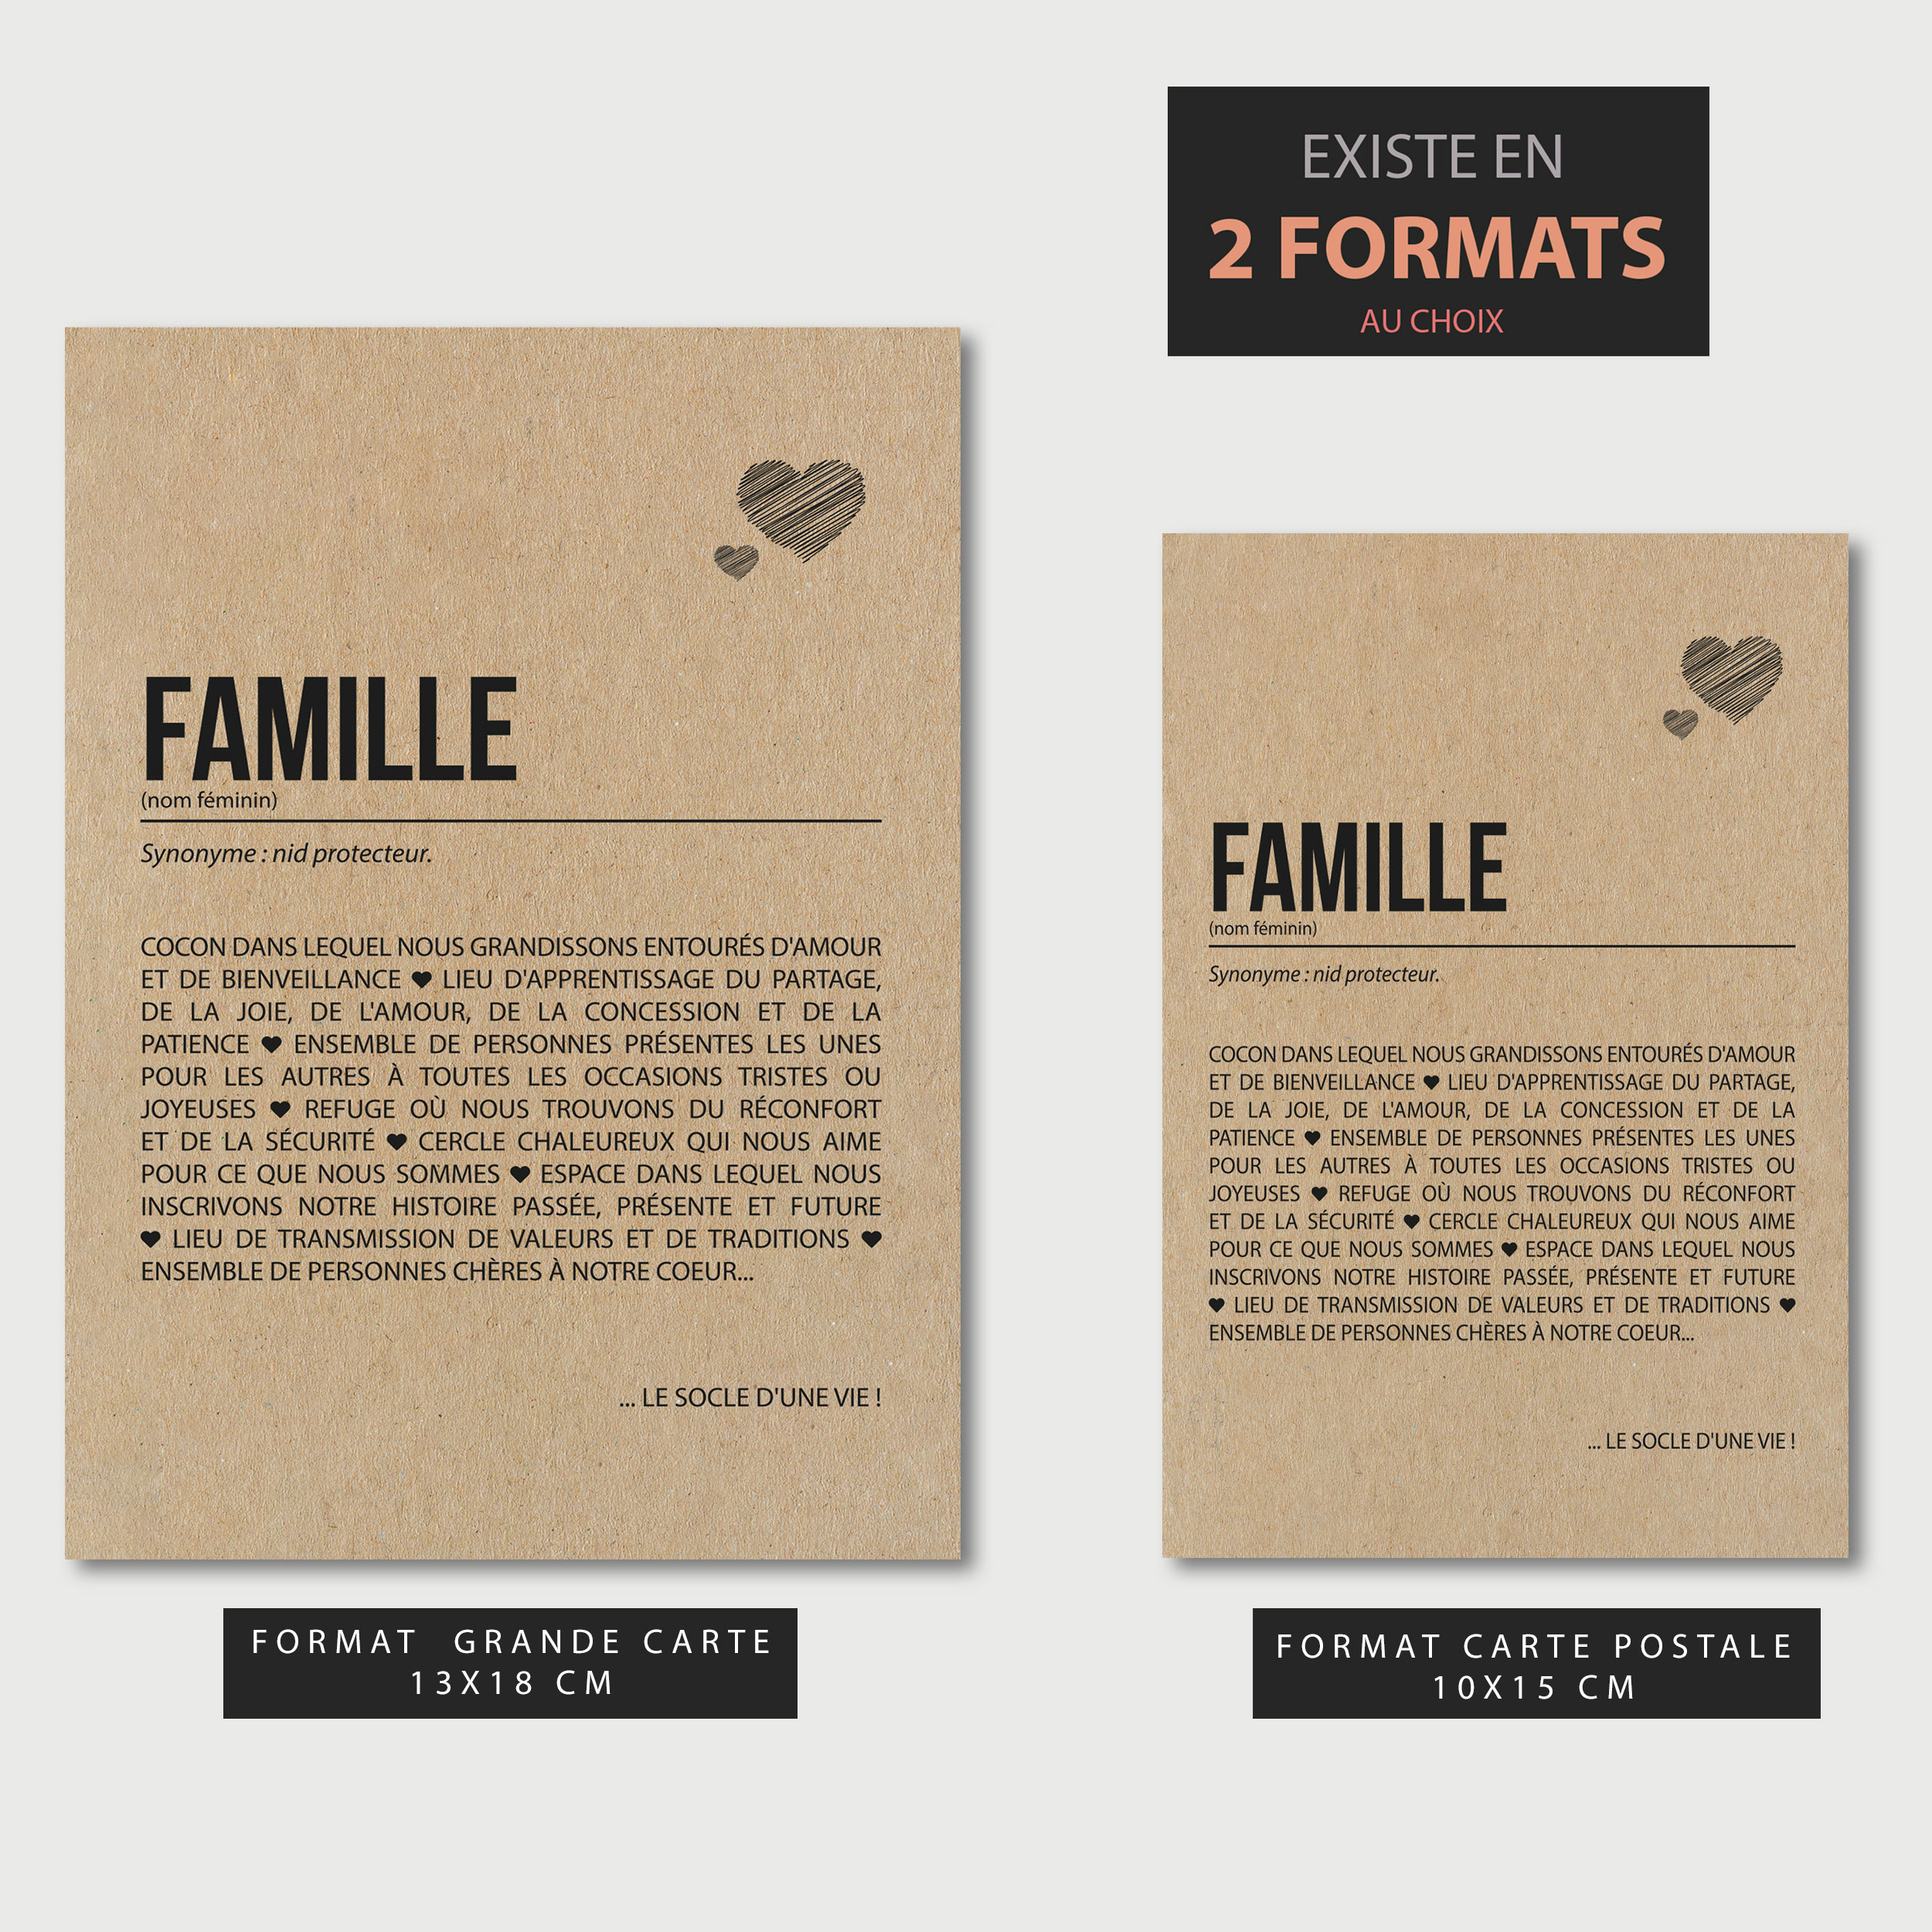 2FORMATS-FAMILLE